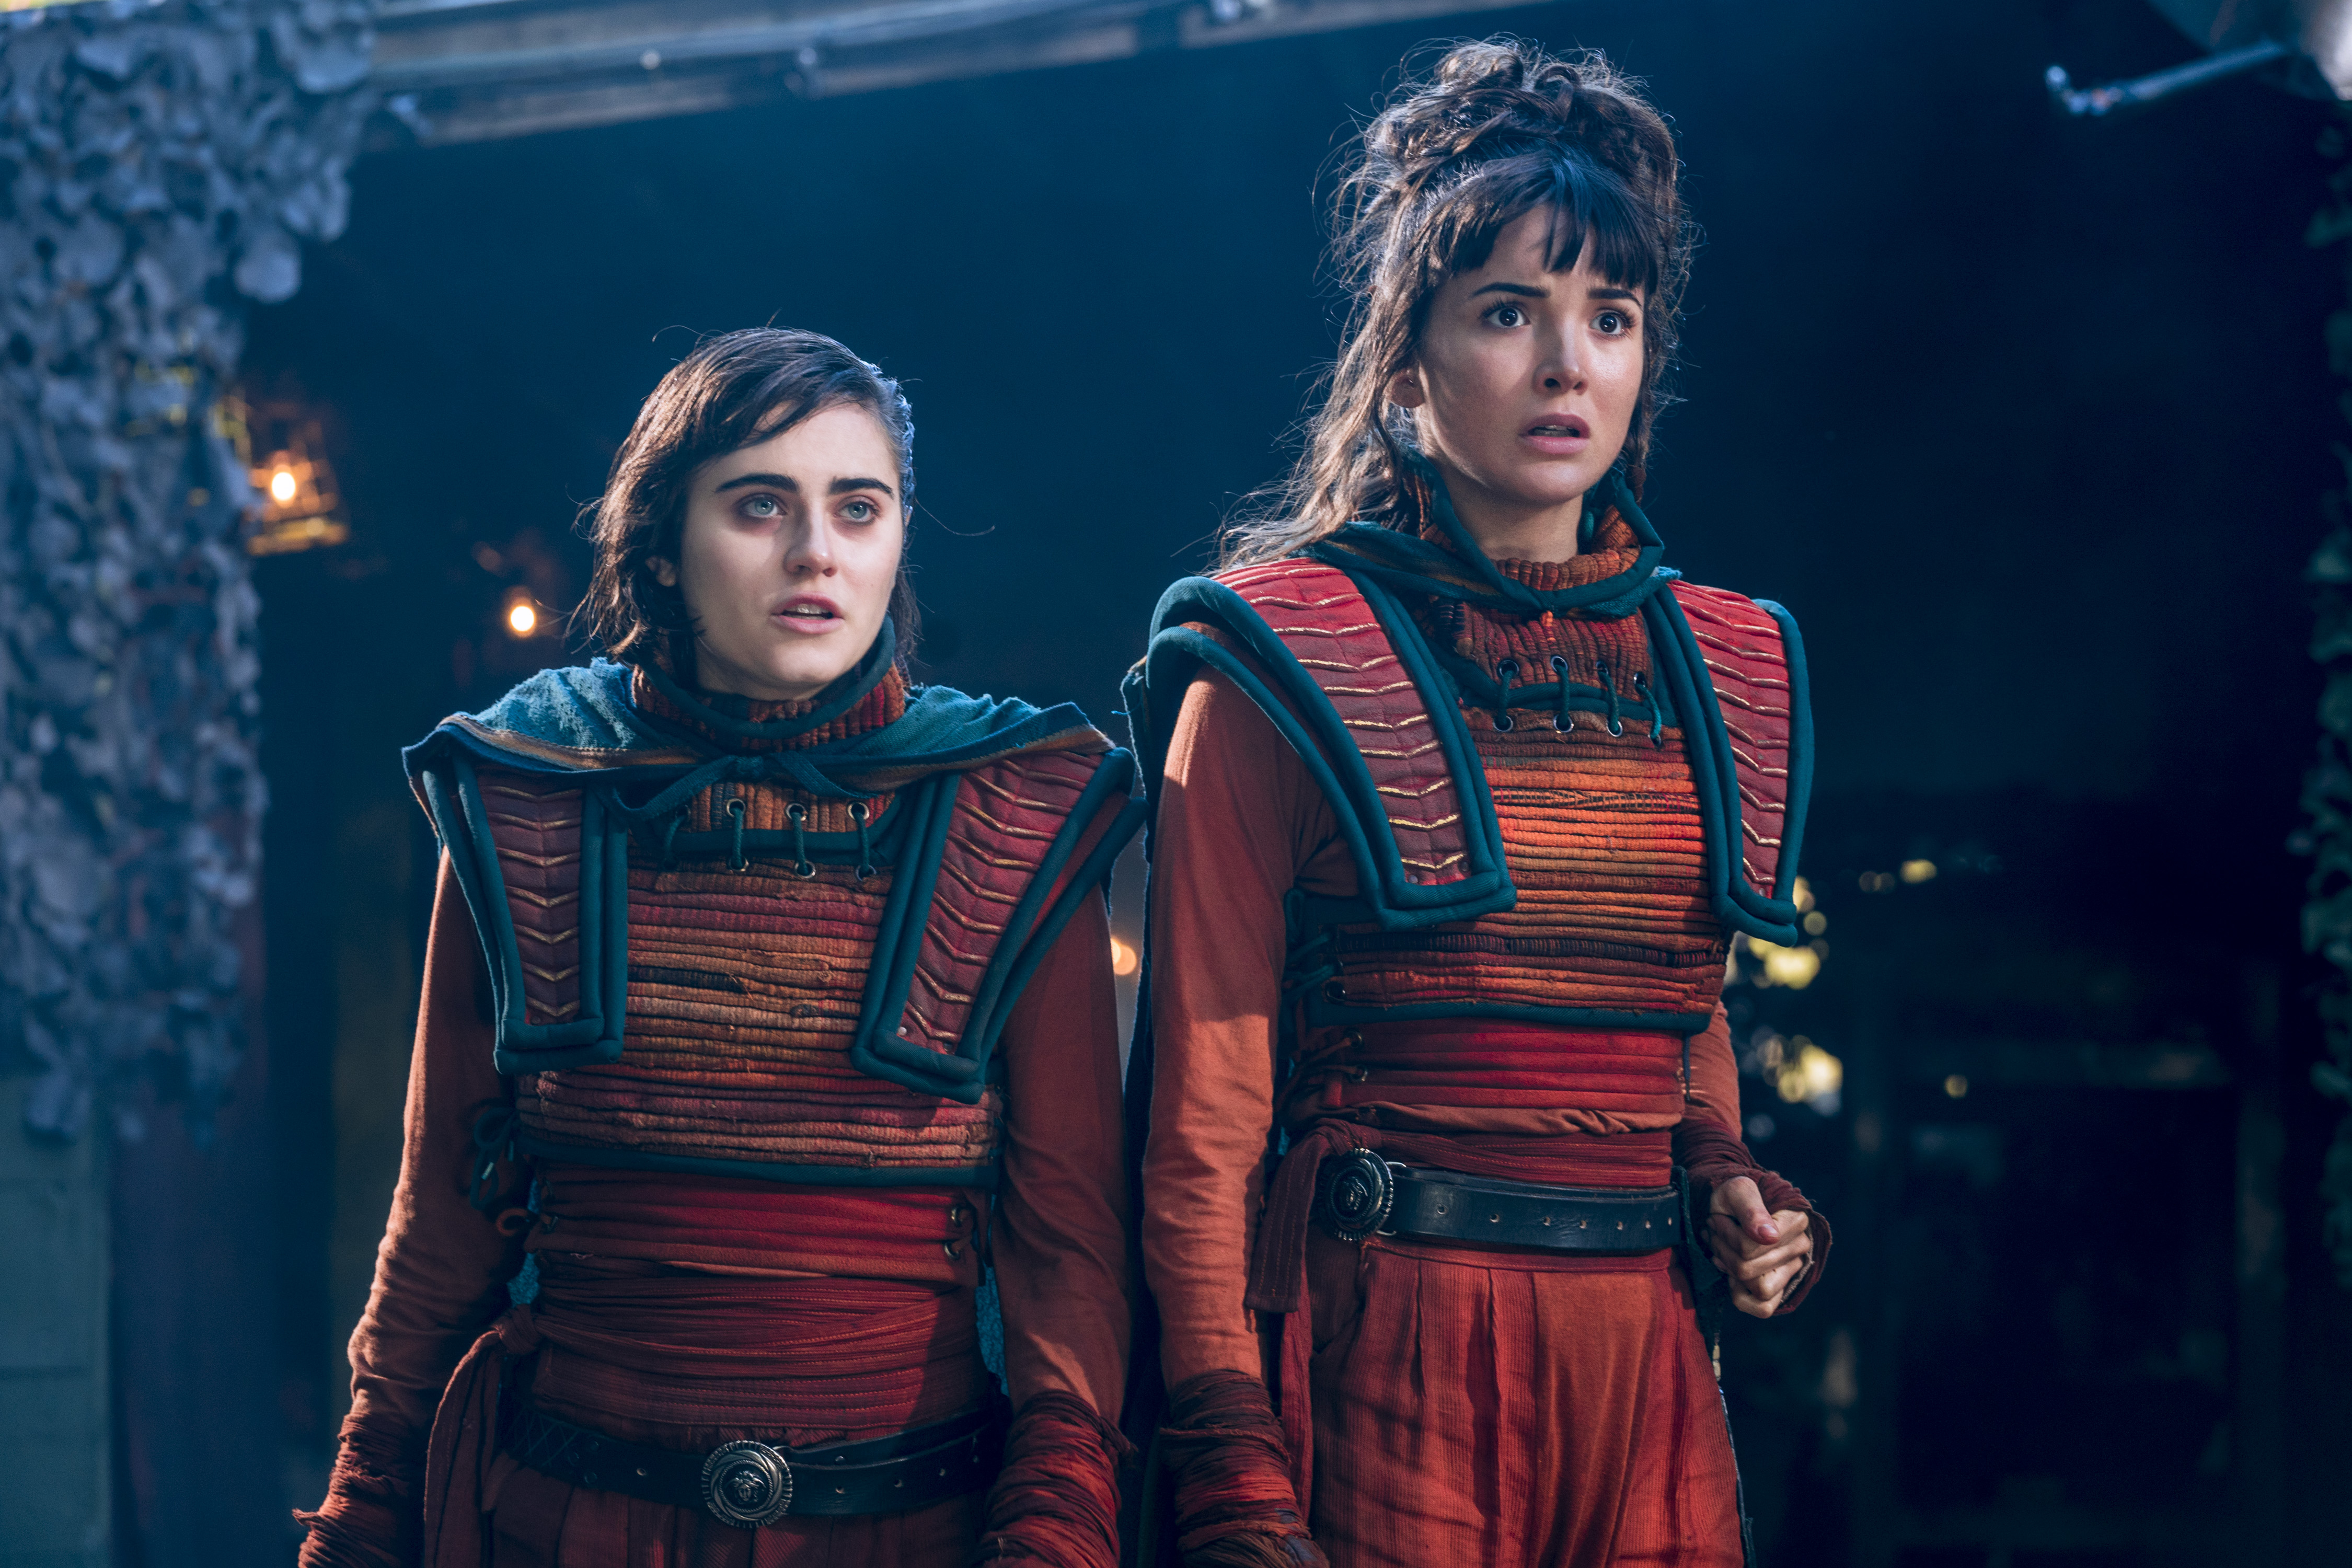 Ally Ioannides as Tilda, Maddison Jaizani as Odessa. Both are wearing orange woven outfits with red and blue accents. (Photo Credit: Aidan Monaghan/AMC)